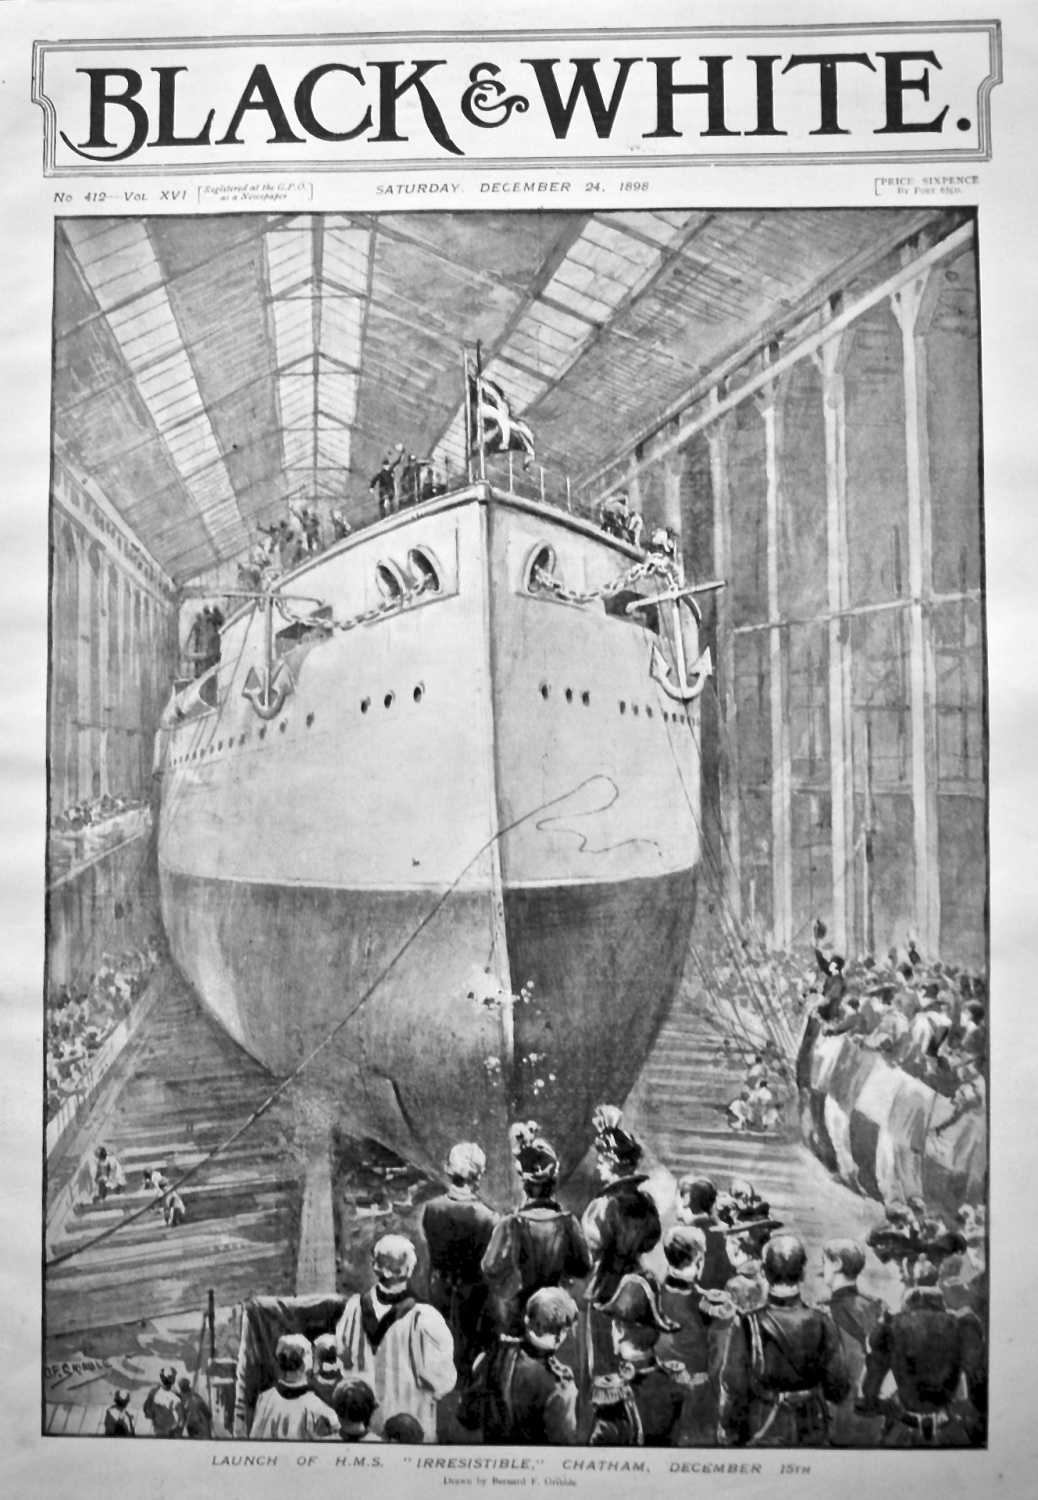 Launch of H. M. S. 